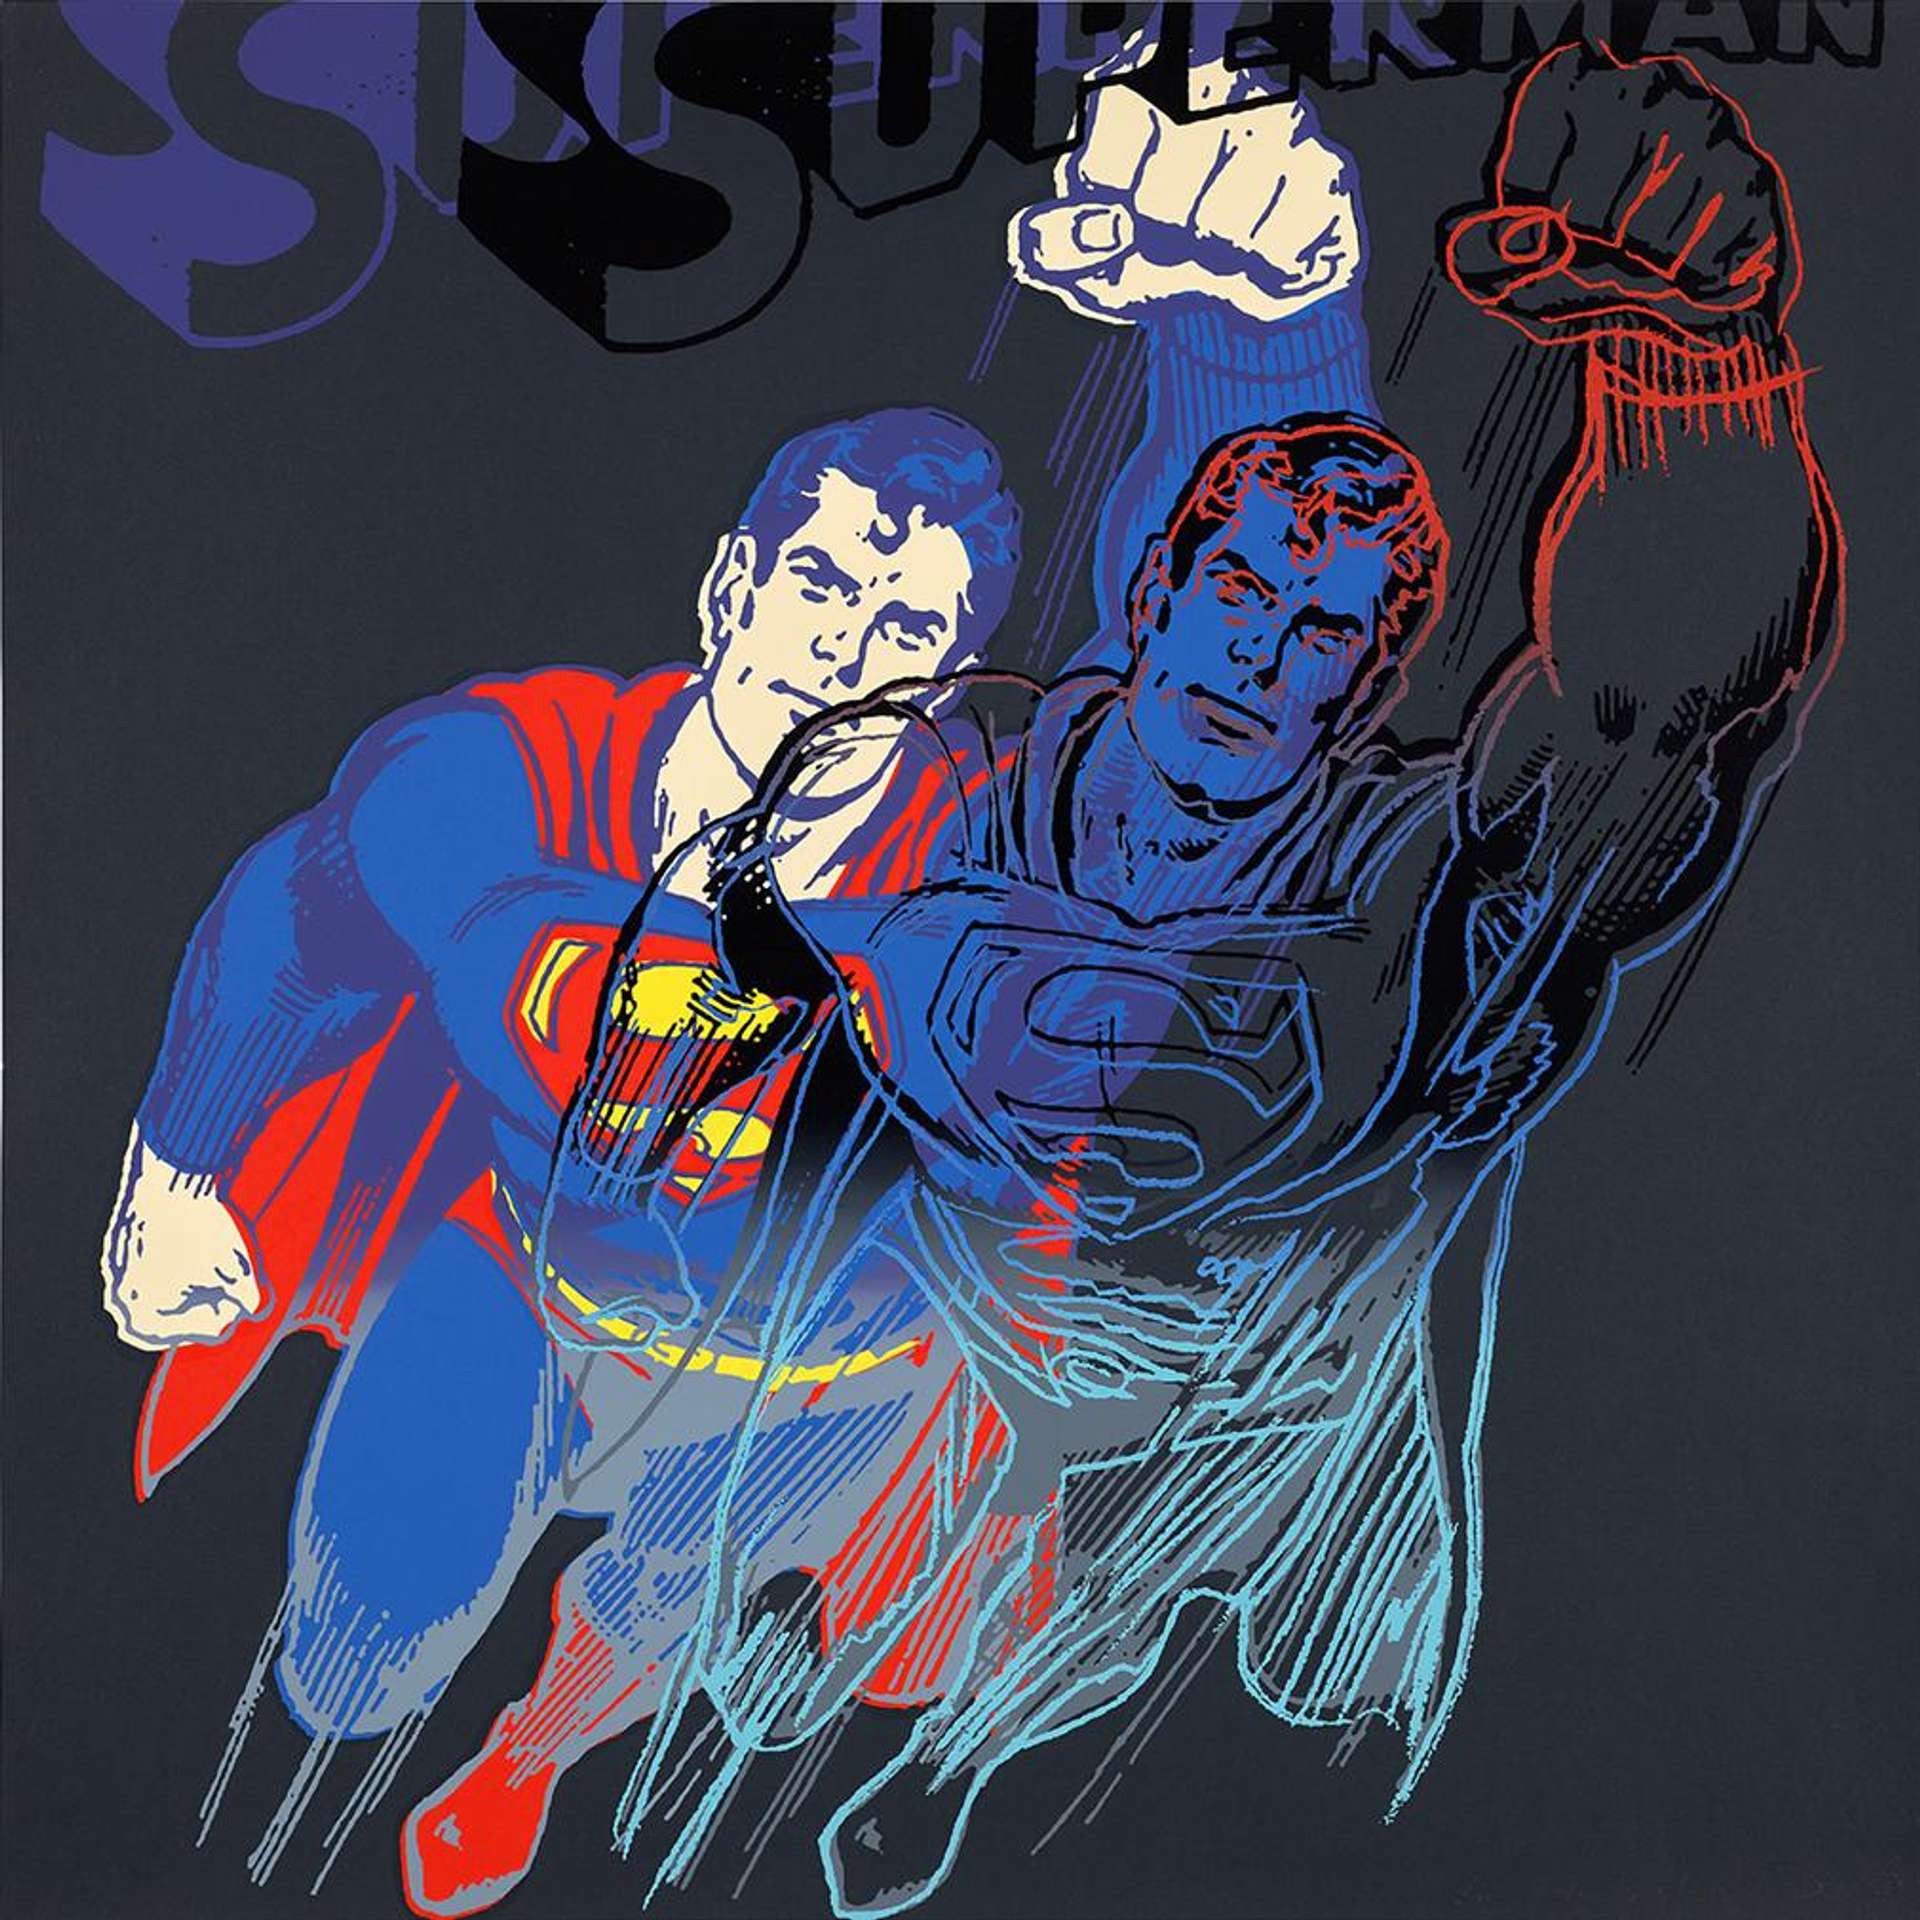 The print captures the essence of Warhol’s style as Superman is rendered in bright colours with bold gestural lines being used to add detail to the print. Warhol takes the conventional image of Superman wearing a blue suit and red cape, however the artist duplicates the figure and superimposes another version of Superman, using a lighter outline of the same image, to give the impression that Superman is being captured in mid-flight.